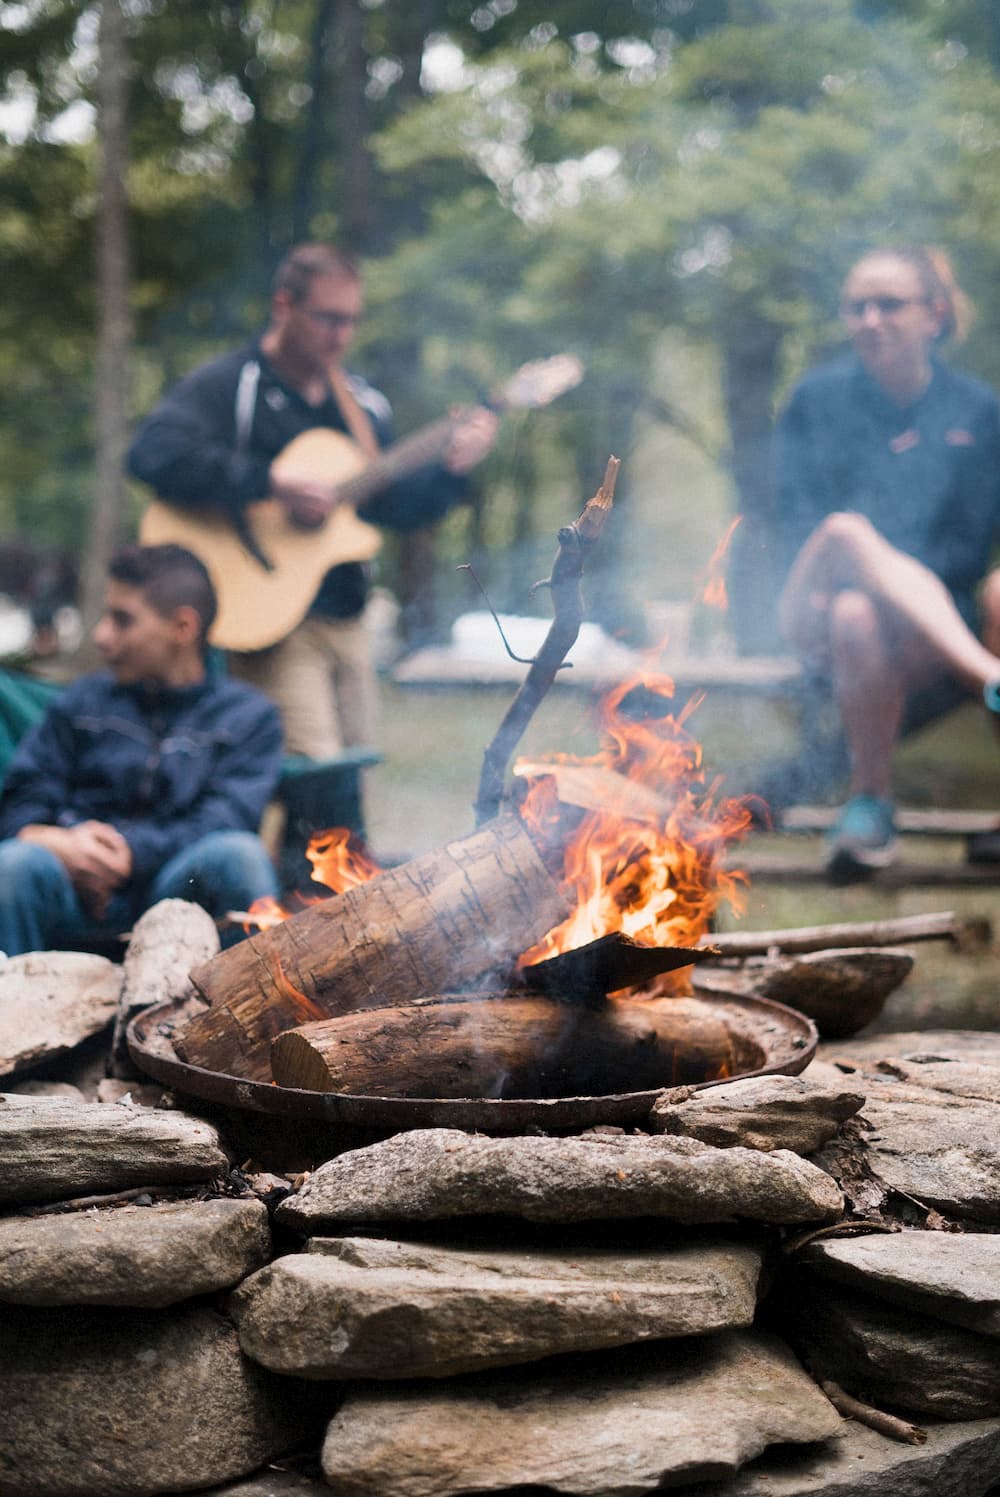 A group of friends gathered around a campfire, playing guitar and chatting